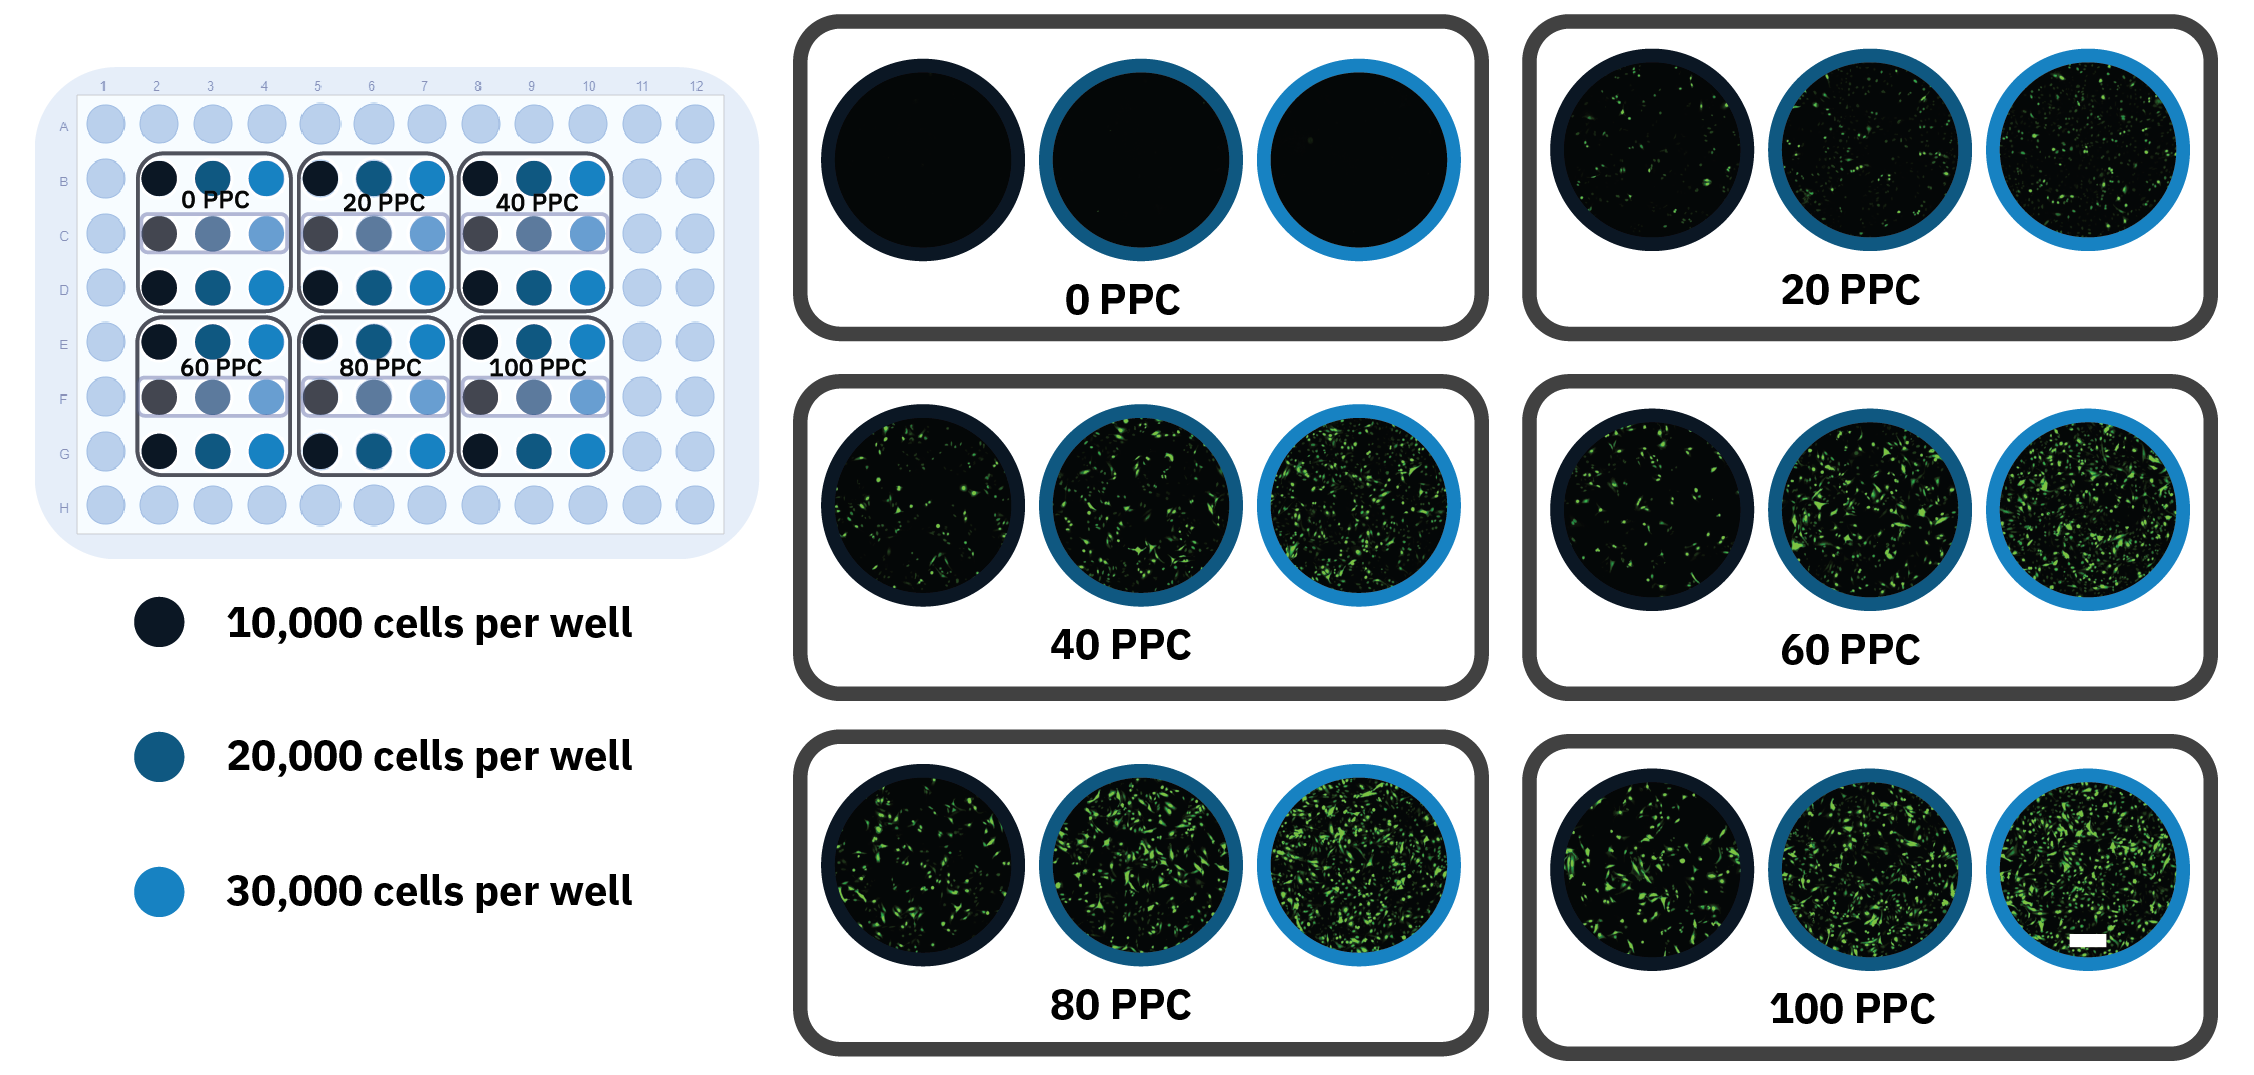 Figure 2: High-throughput optimization of transduction conditions. A) Schematic overview of a 96-well plate indicating the different  plating densities and virus concentration treatments. B) Fluorescence images of the different conditions taken after 24 h incubation,  showing Nucleus-GFP expression. The outlined wells showcase individual replicates. The scale bar indicates 200 μm.